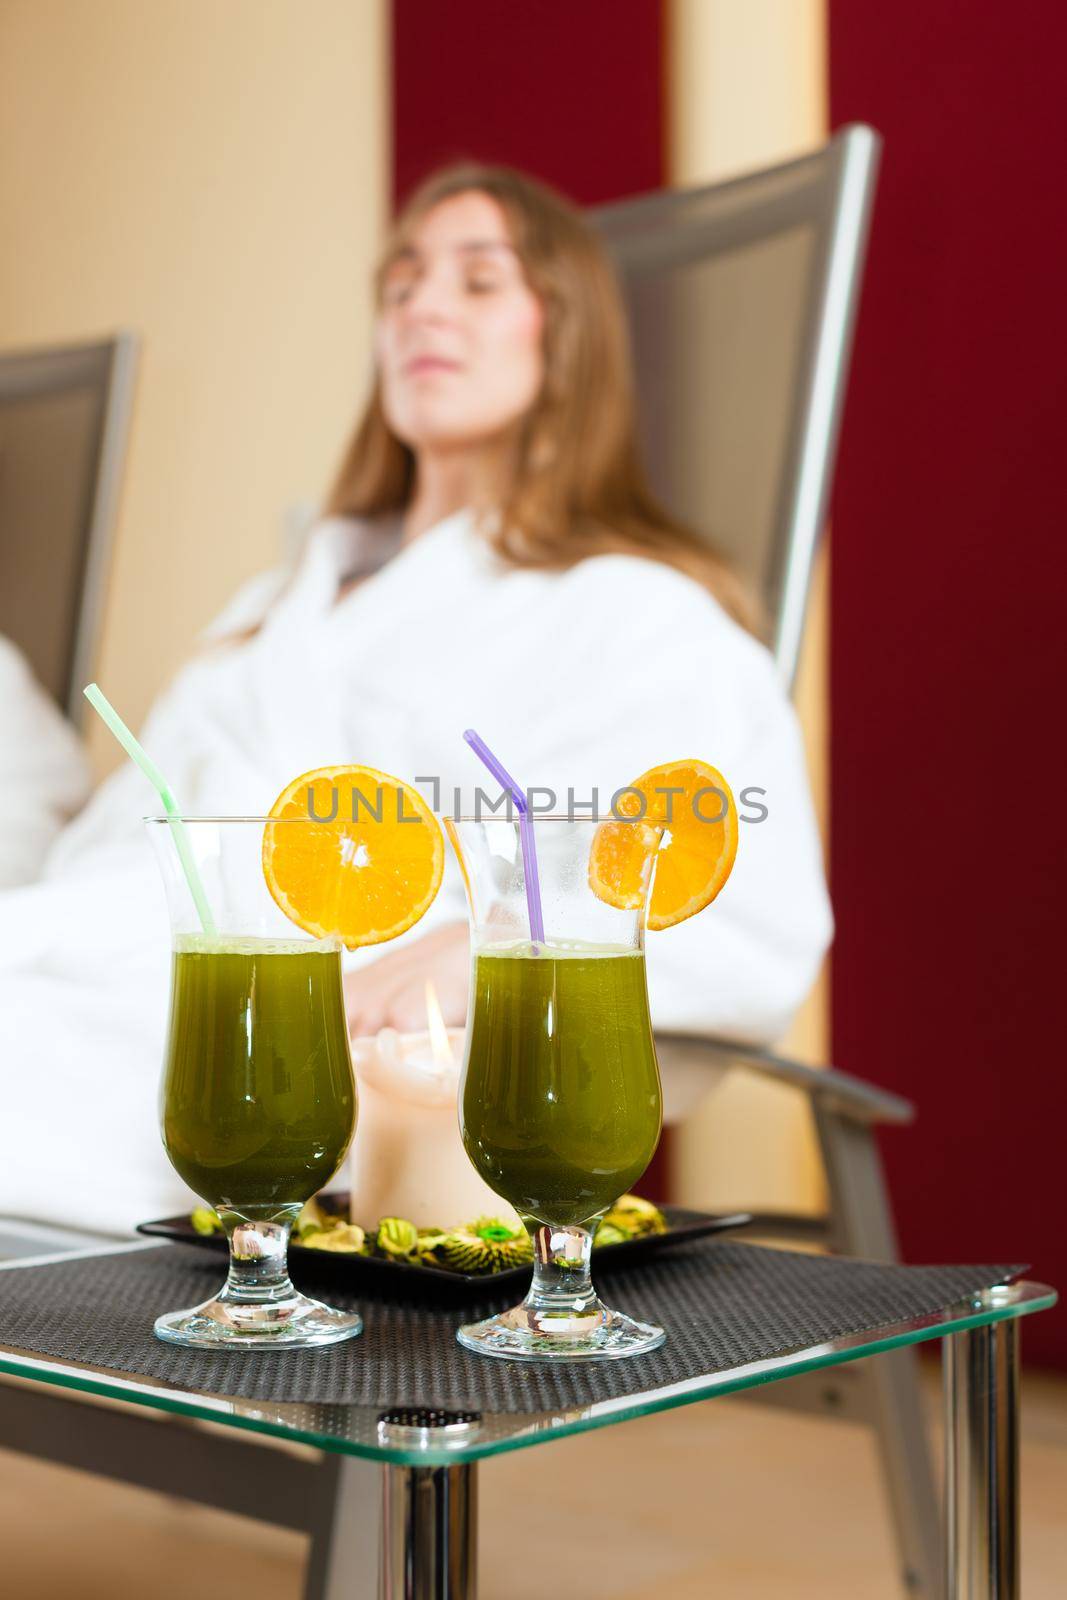 Wellness - Chlorophyll-Shake on a table by Kzenon